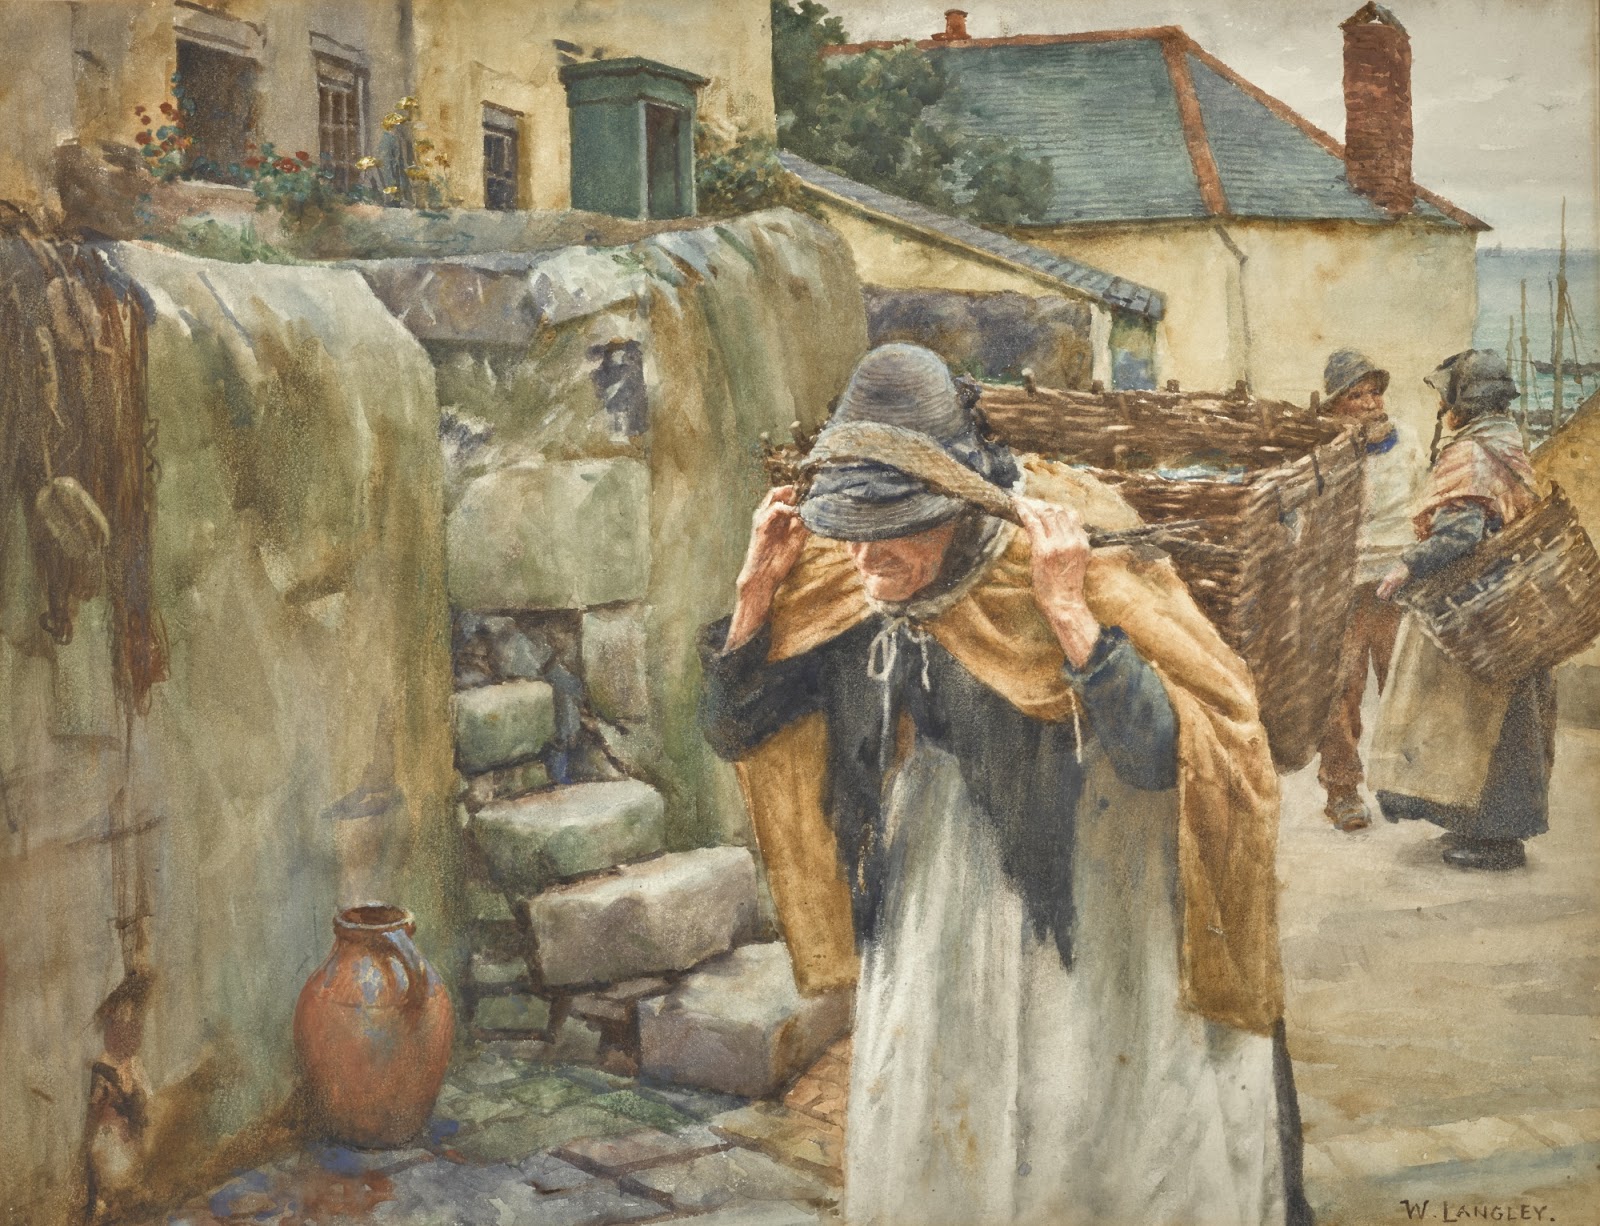 Walter Langley Carrying The Catch